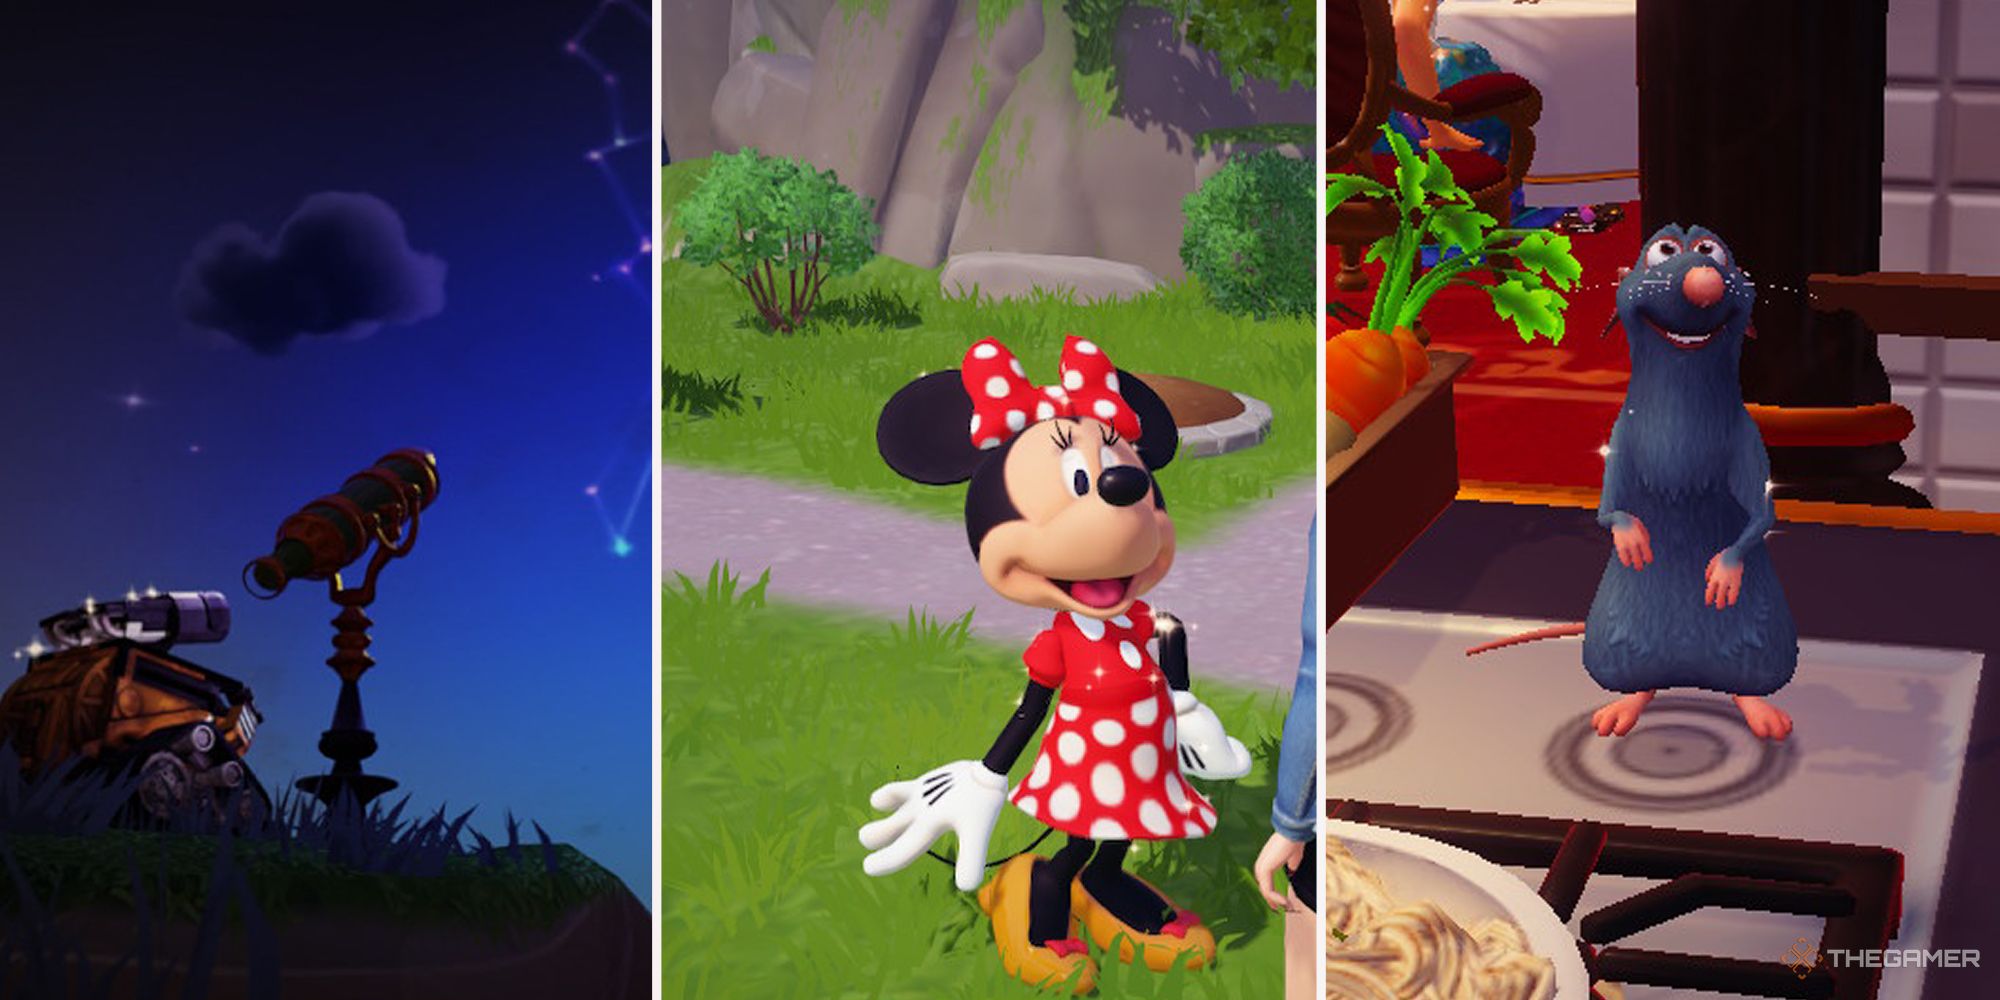 Combined images of WALL-E, Minnie Mouse, and Remy in Disney Dreamlight Valley